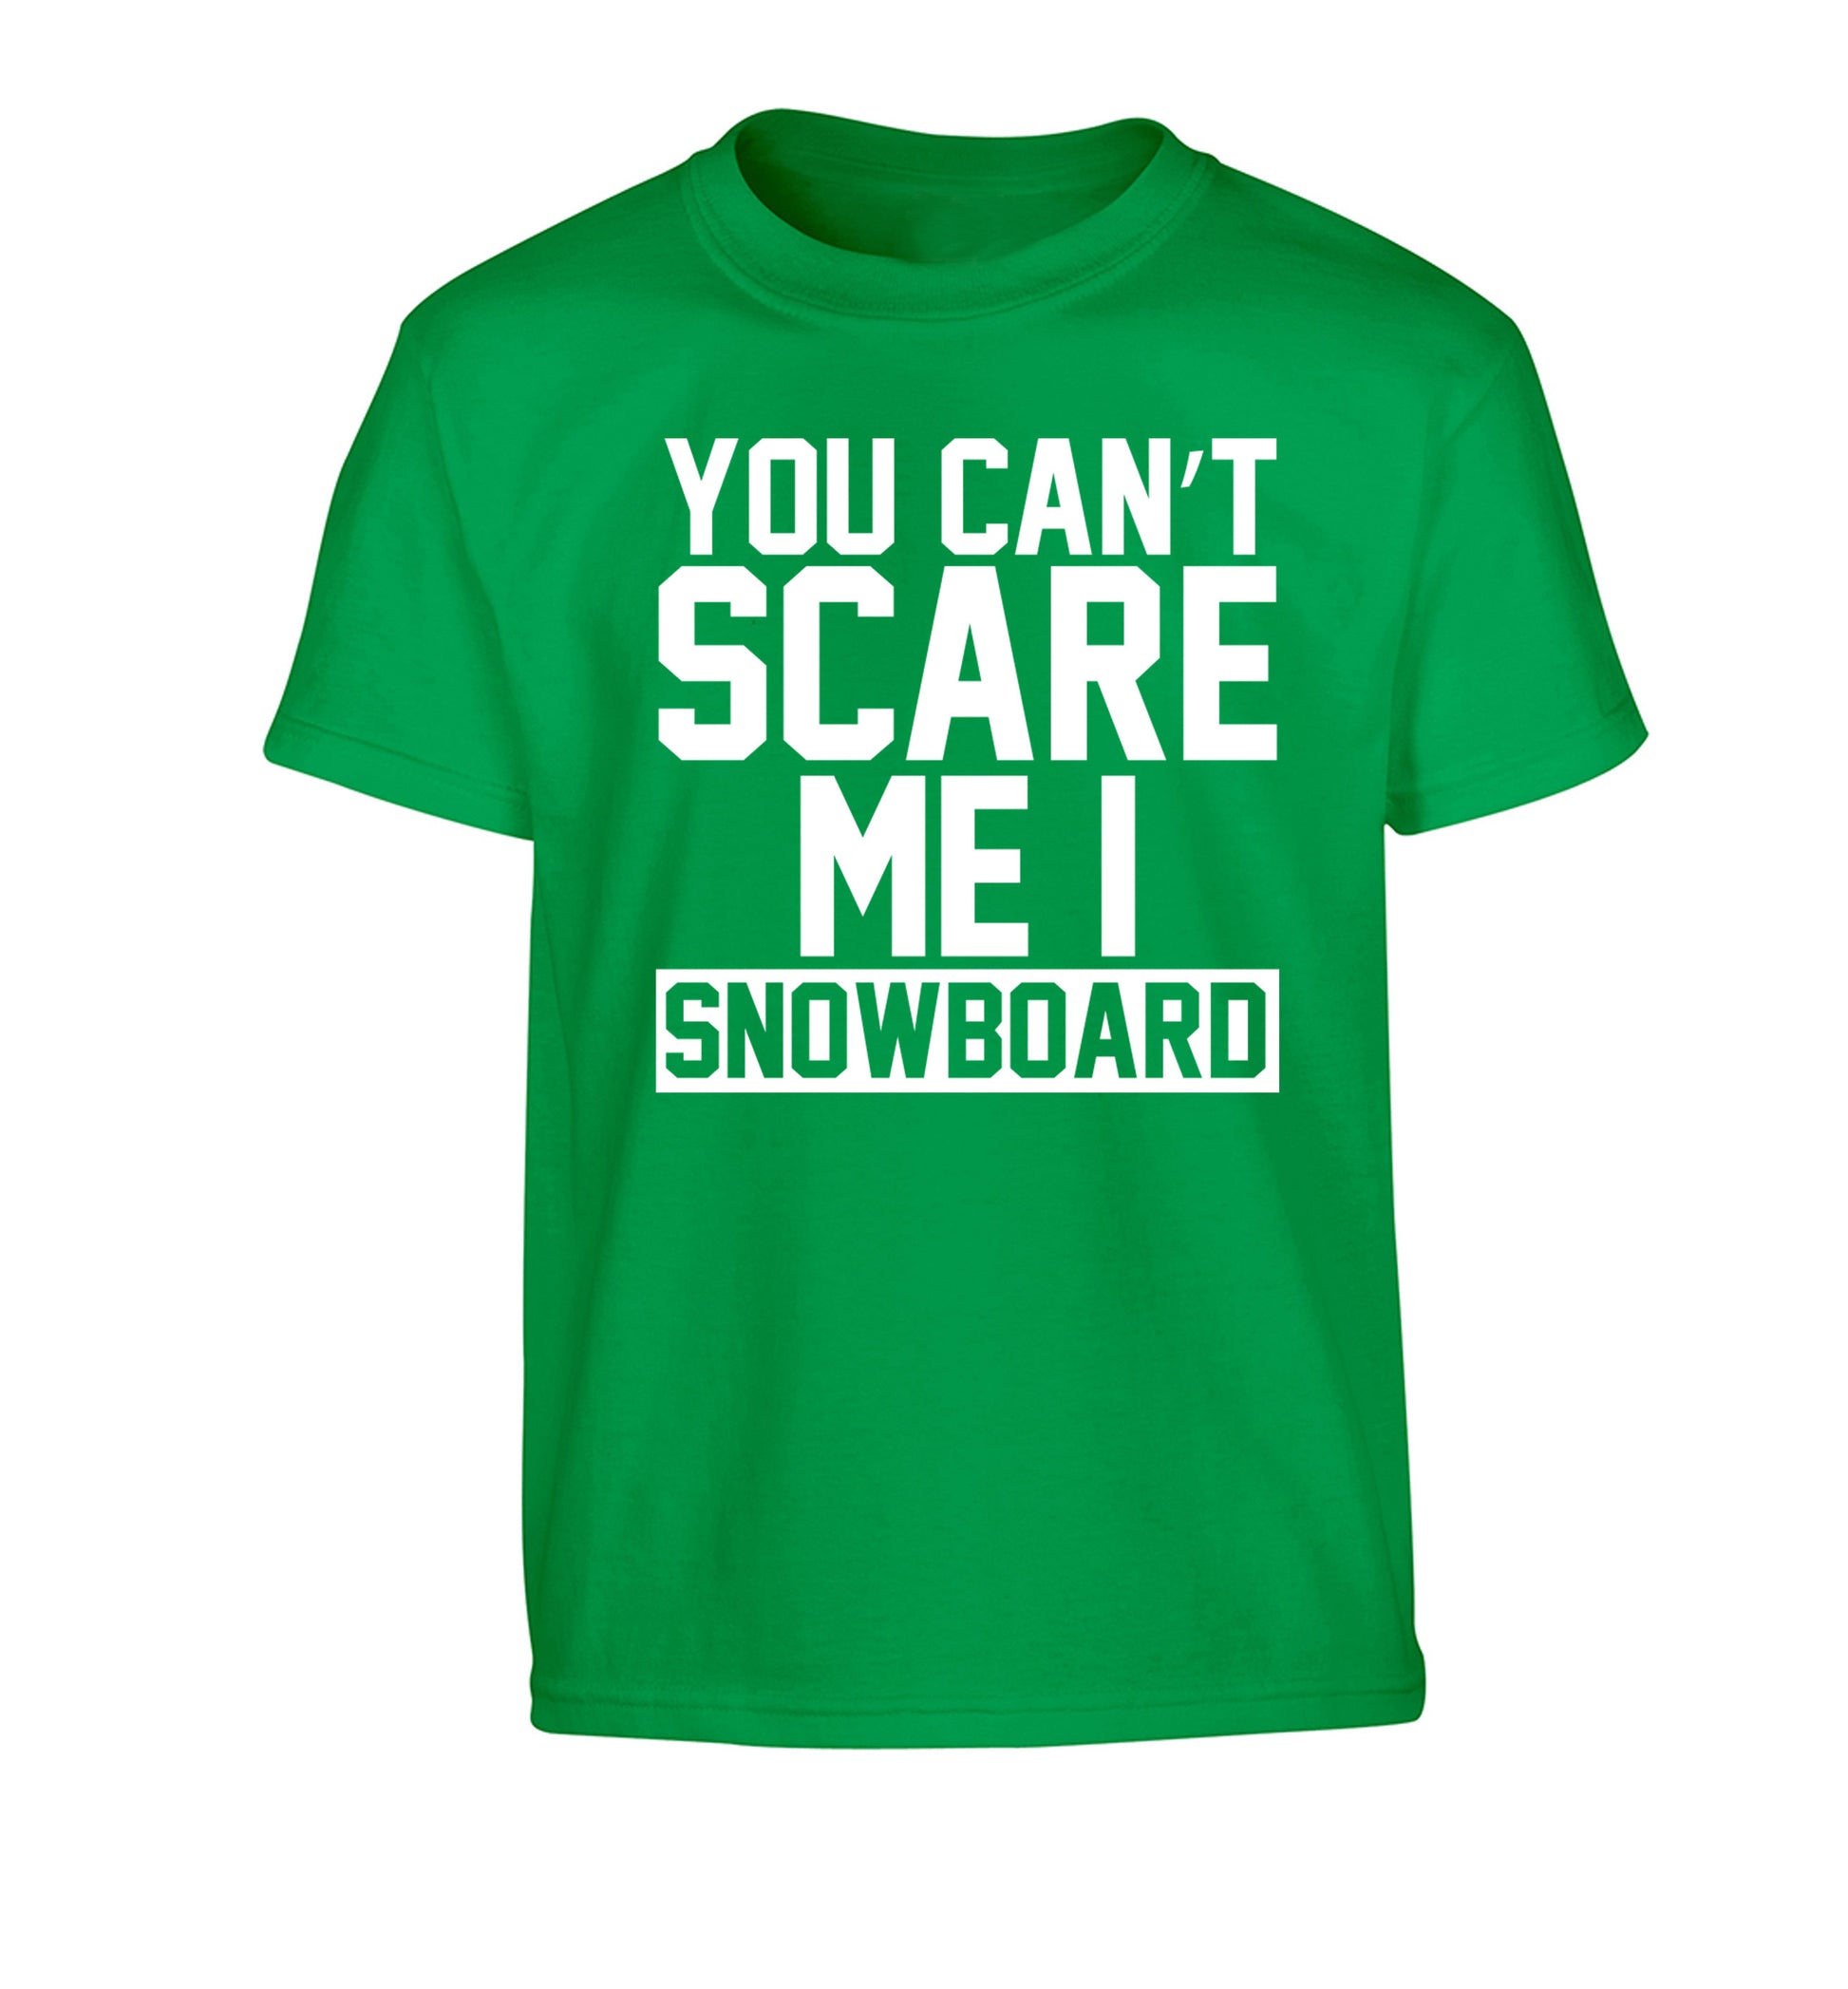 You can't scare me I snowboard Children's green Tshirt 12-14 Years